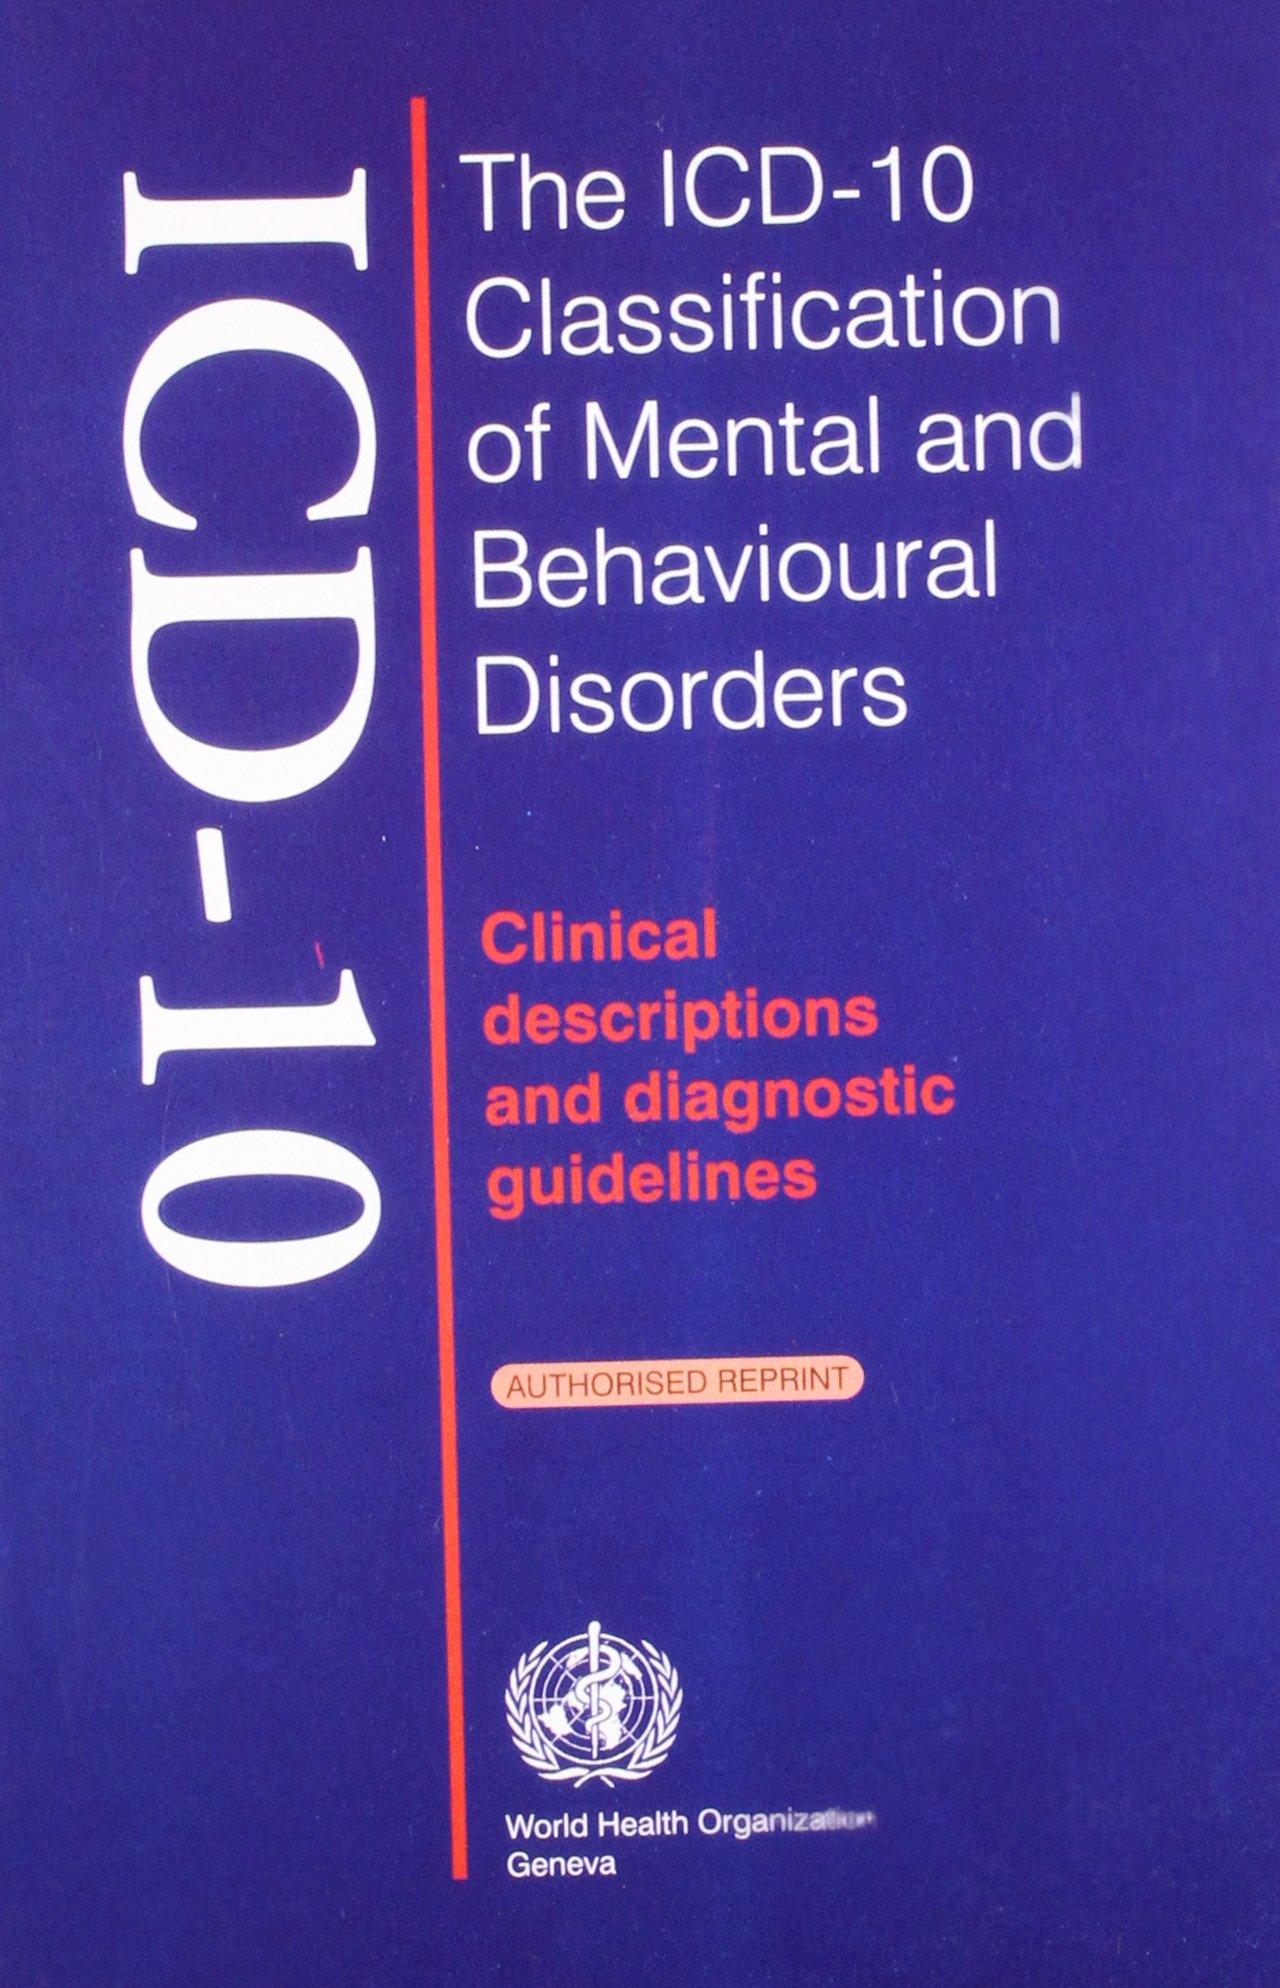 The ICD-10 Classification of Mental & Behavioural Disorders -Clinical Descriptions and Diagnostic Guidelines